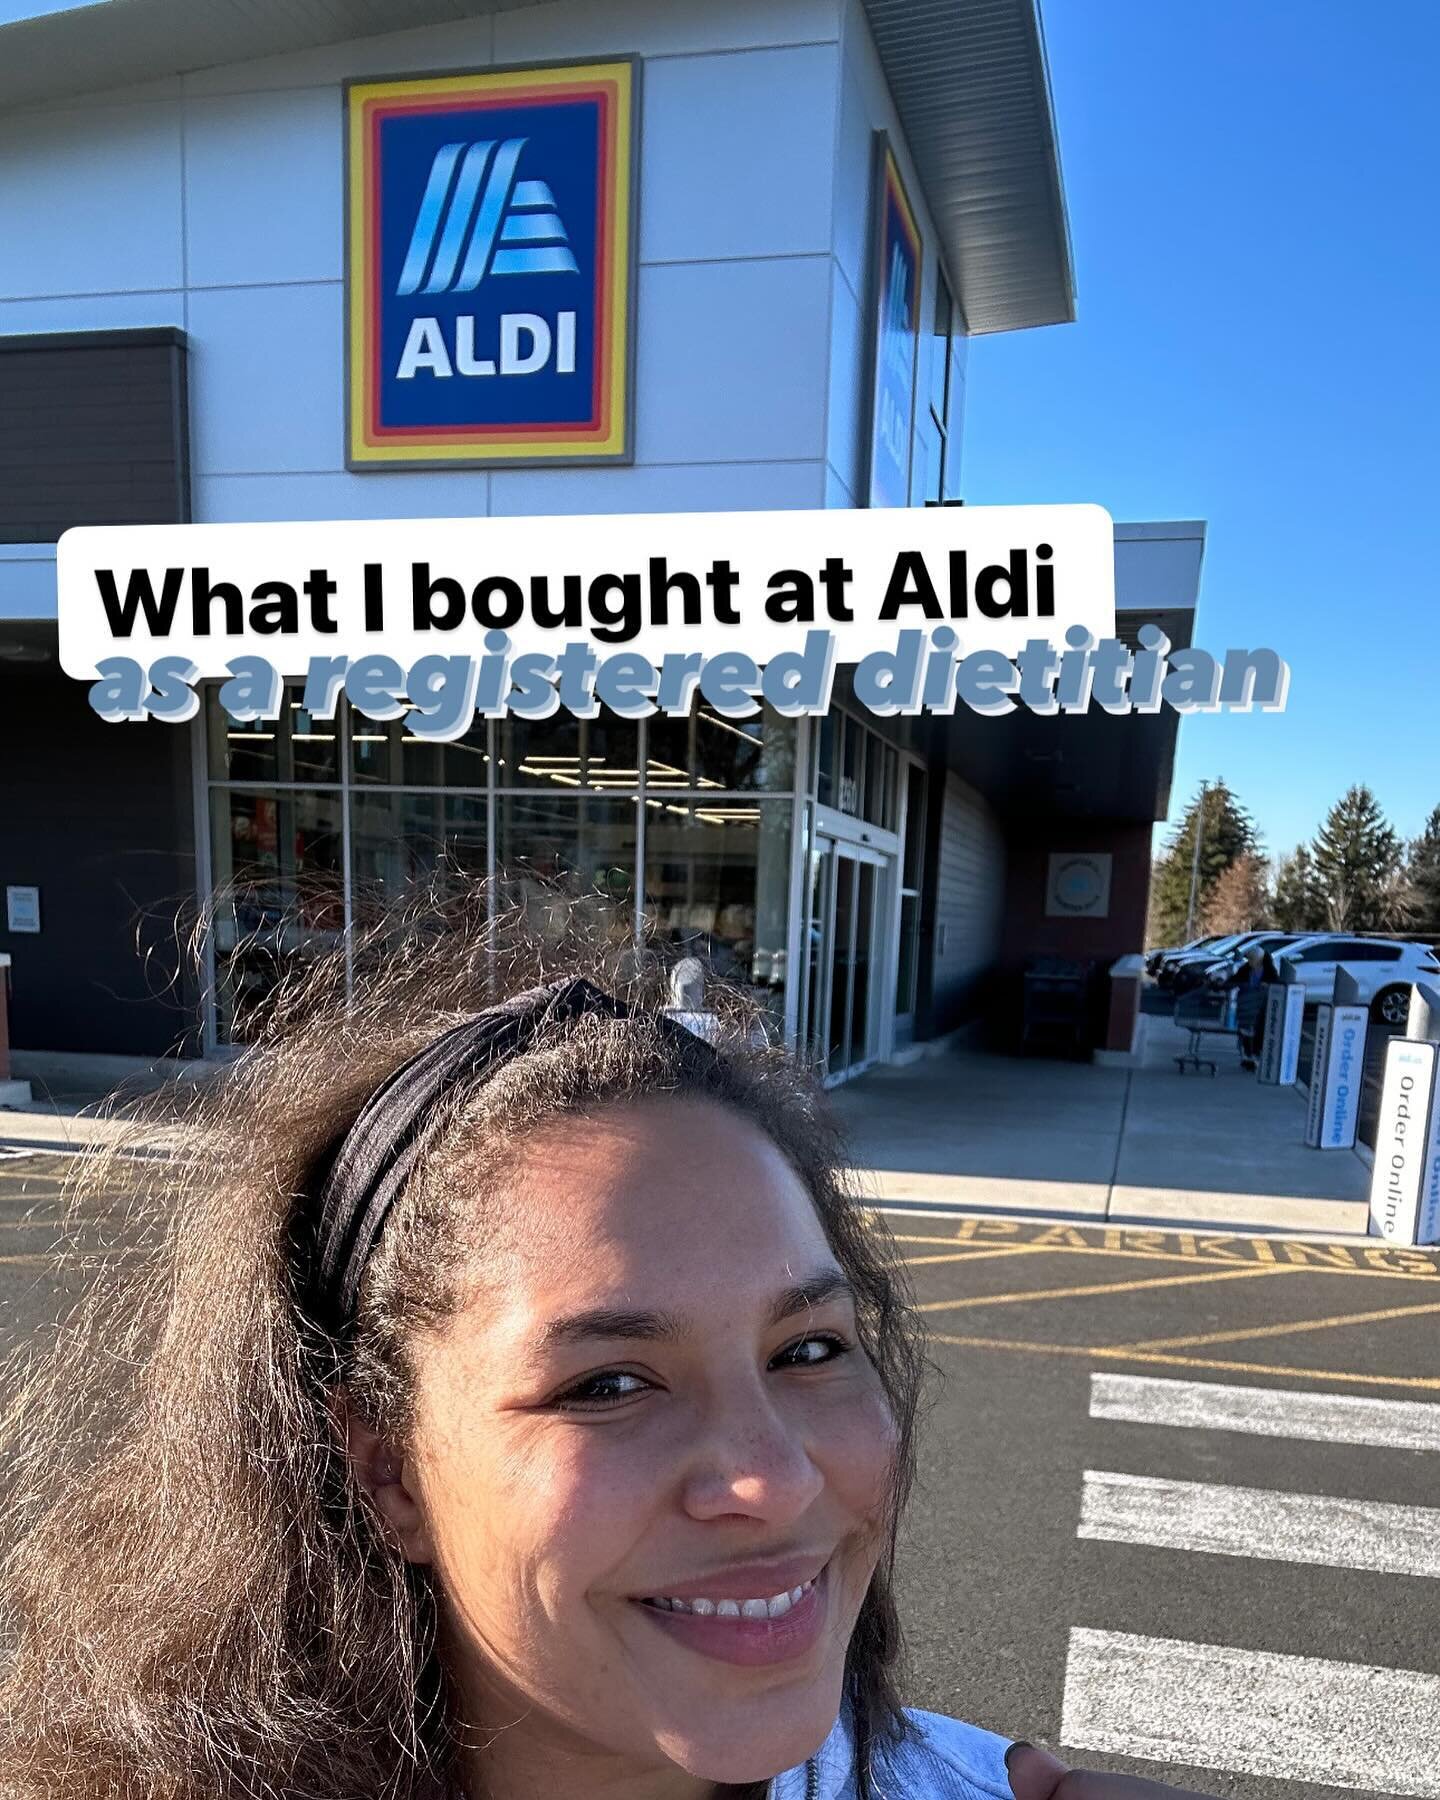 A lil @aldiusa trip this week&mdash; because apparently dietitians who love Aldi and eat their &ldquo;processed foods&rdquo; made an influencer mad over on el tiky toky.